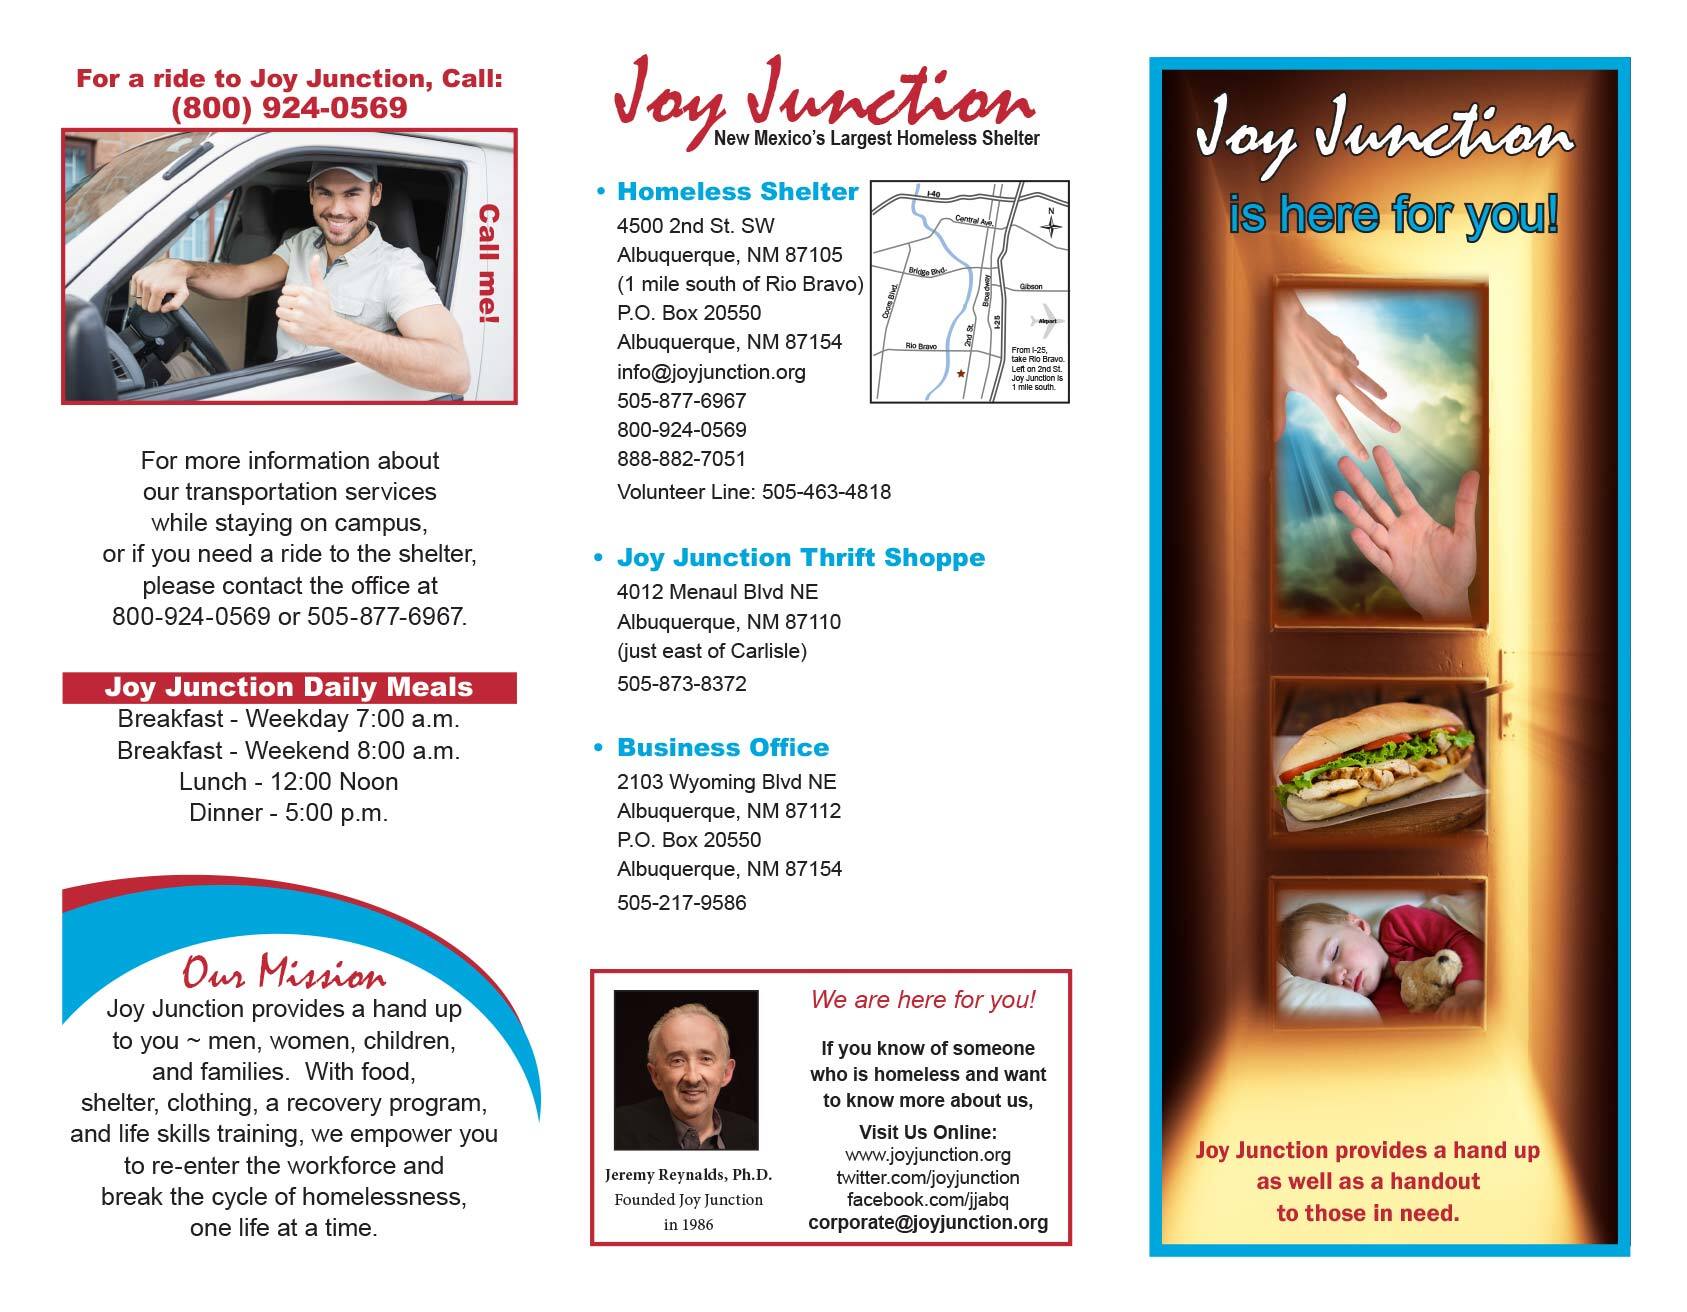 Joy Junction is here for you brochure exterior